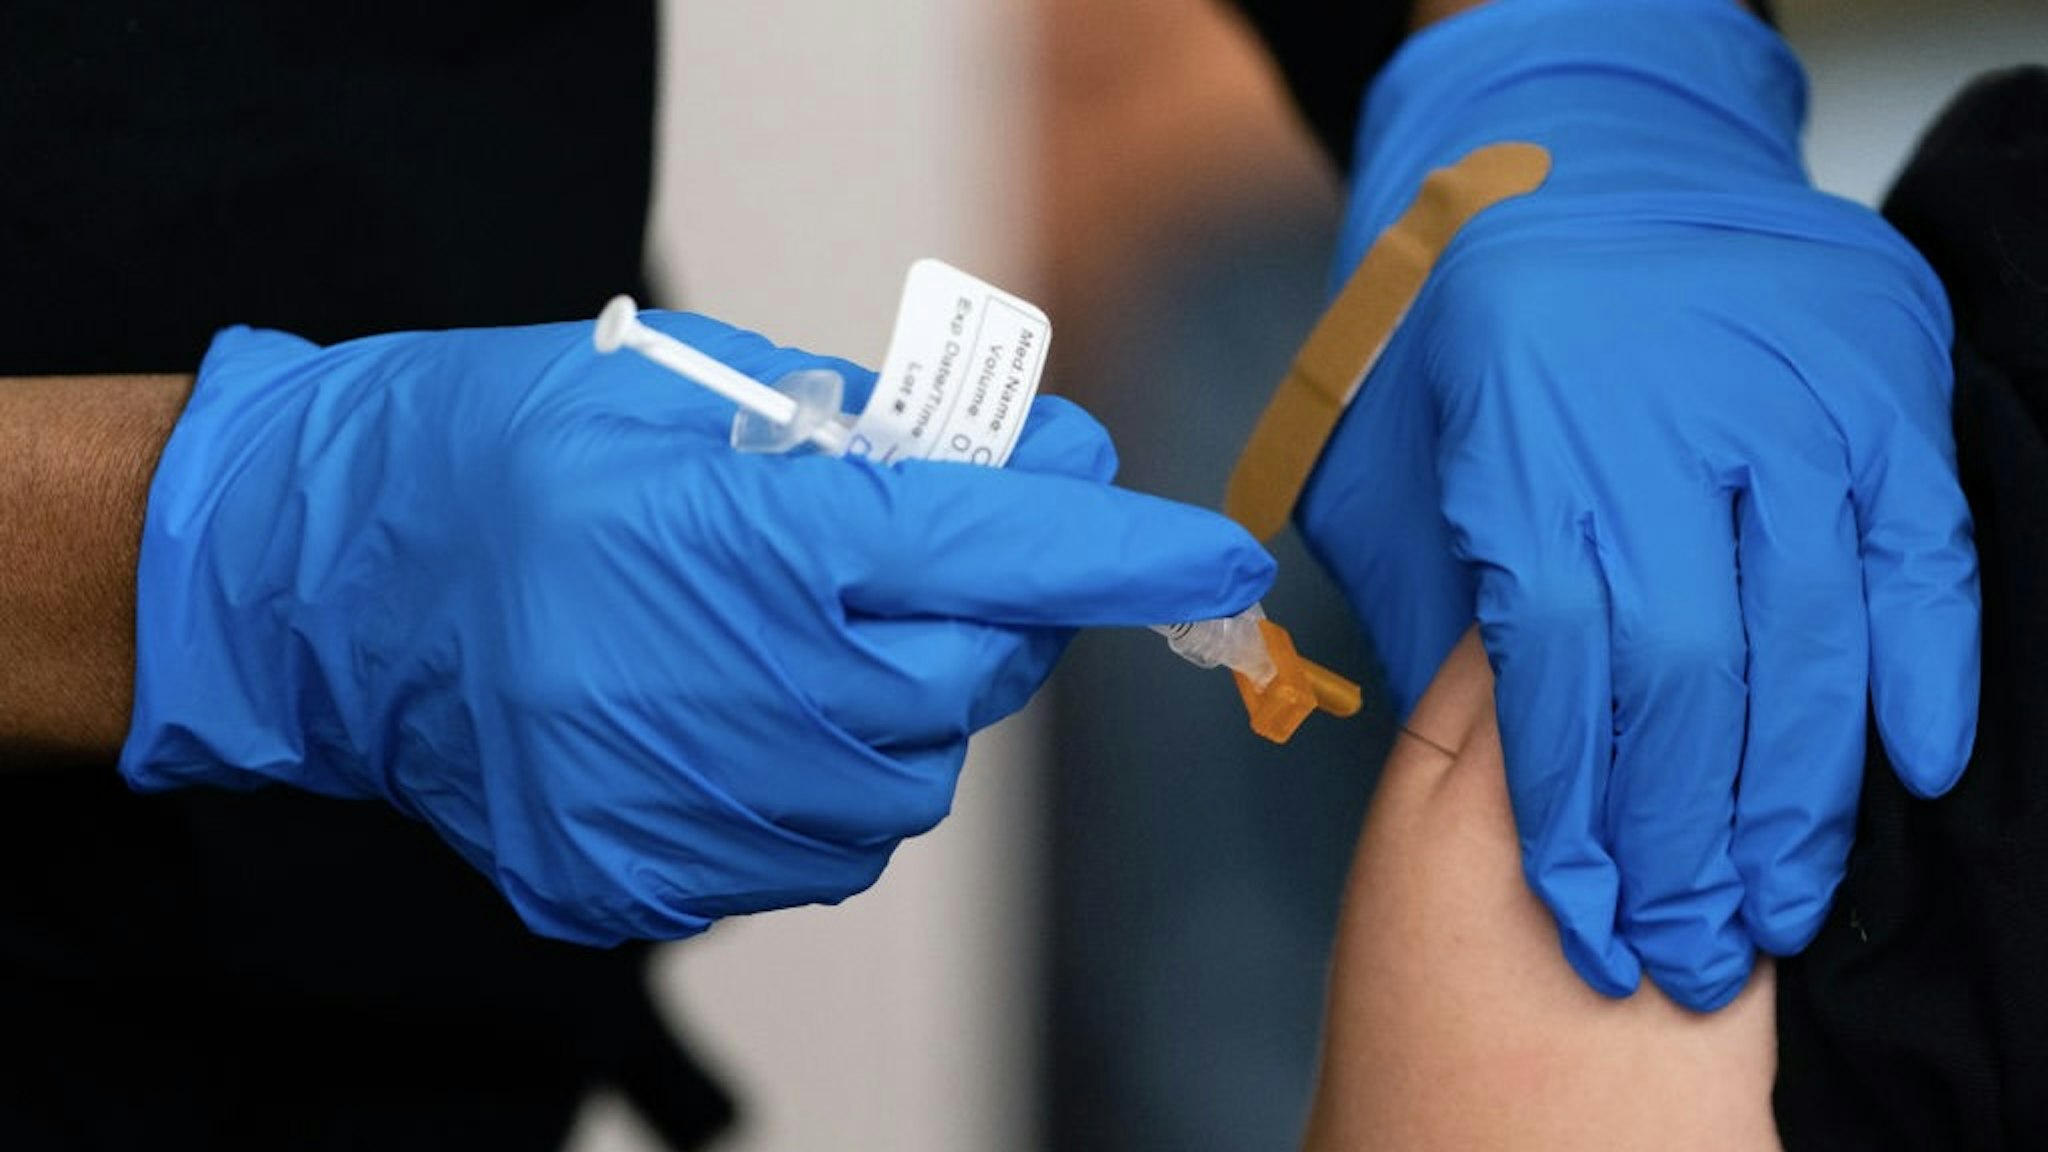 An attendee recieves a dose of the Pfizer-BioNTech Covid-19 vaccine during an Atlanta Braves baseball game at Truist Park in Atlanta, Georgia, U.S., on Friday, May 7, 2021. The Atlanta Braves will be providing free COVID-19 vaccinations for fans during their games Friday and Saturday against the Philadelphia Phillies. Each person who gets vaccinated is eligible to receive two free tickets to a future Braves game. Photographer: Elijah Nouvelage/Bloomberg